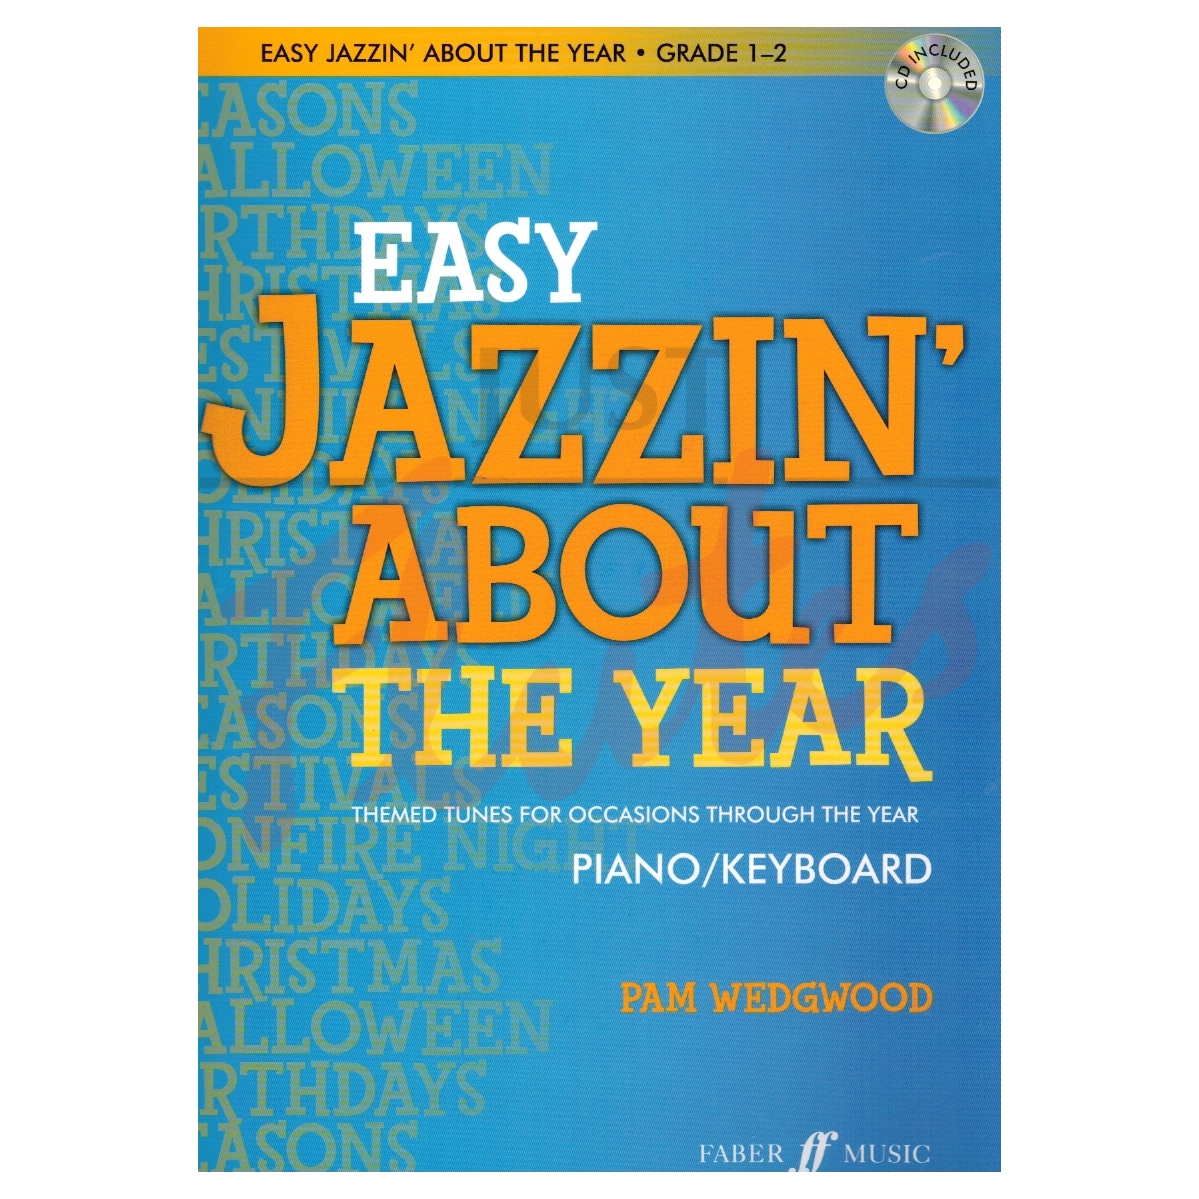 Easy Jazzin' About - The Year